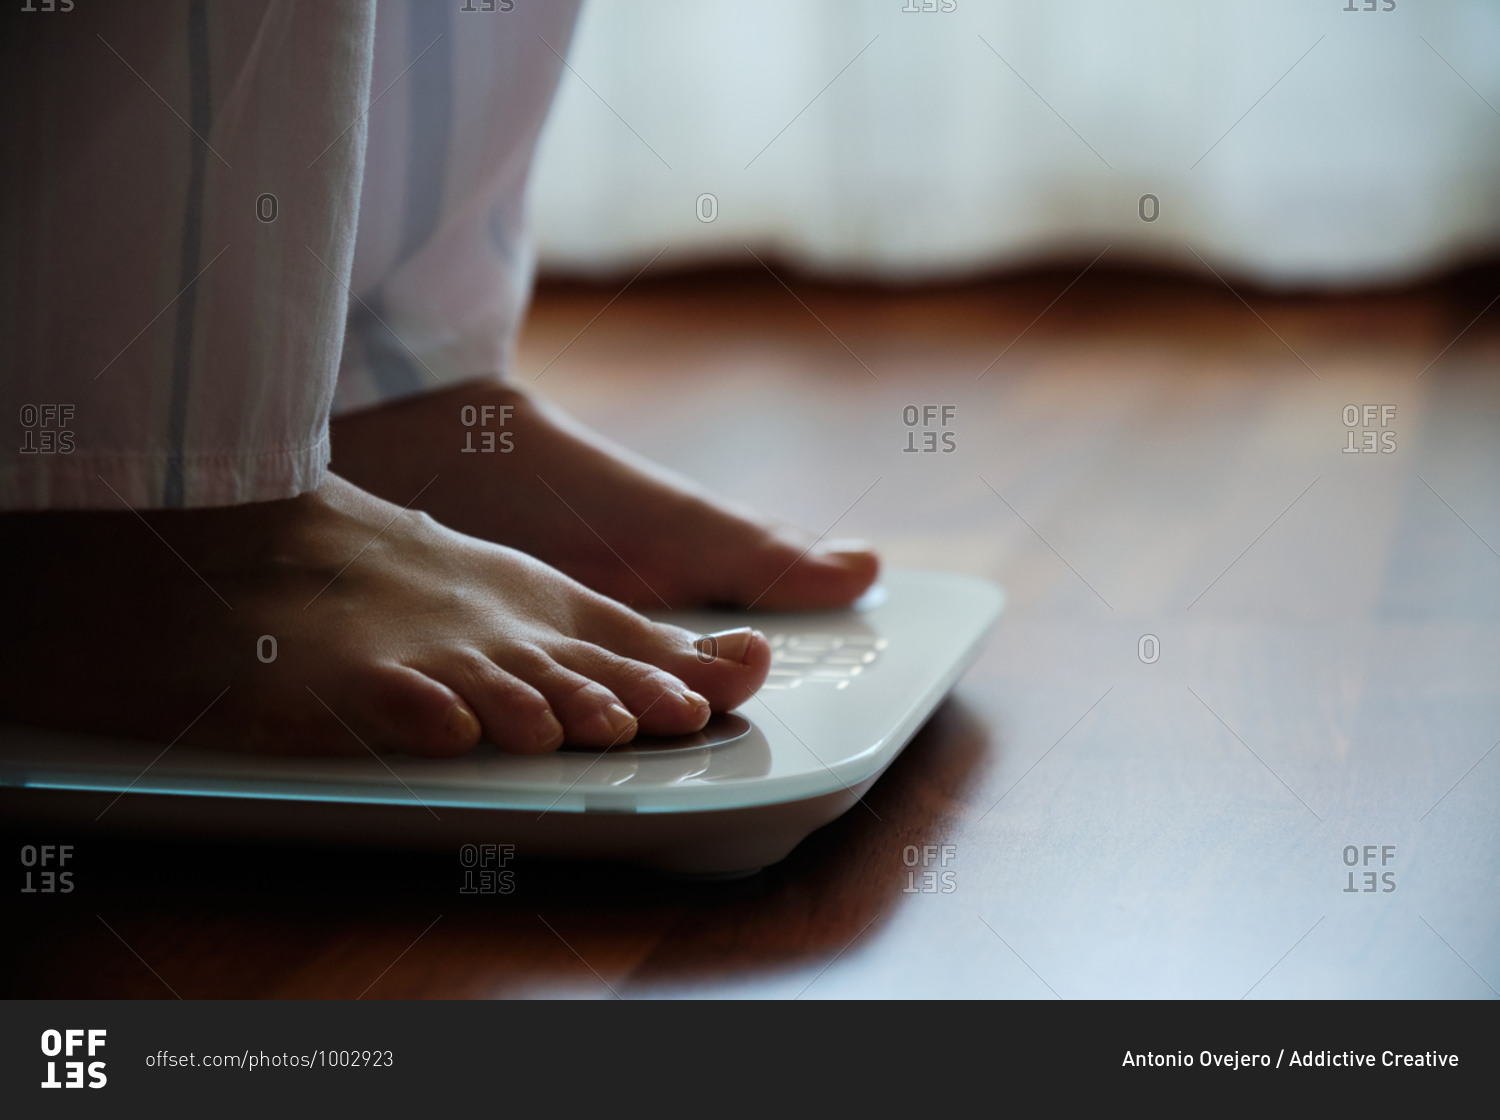 Crop faceless barefoot female in cozy pajama standing on digital weight and body fat scales with display showing healthy weight of 60 kg on bathroom floor in morning